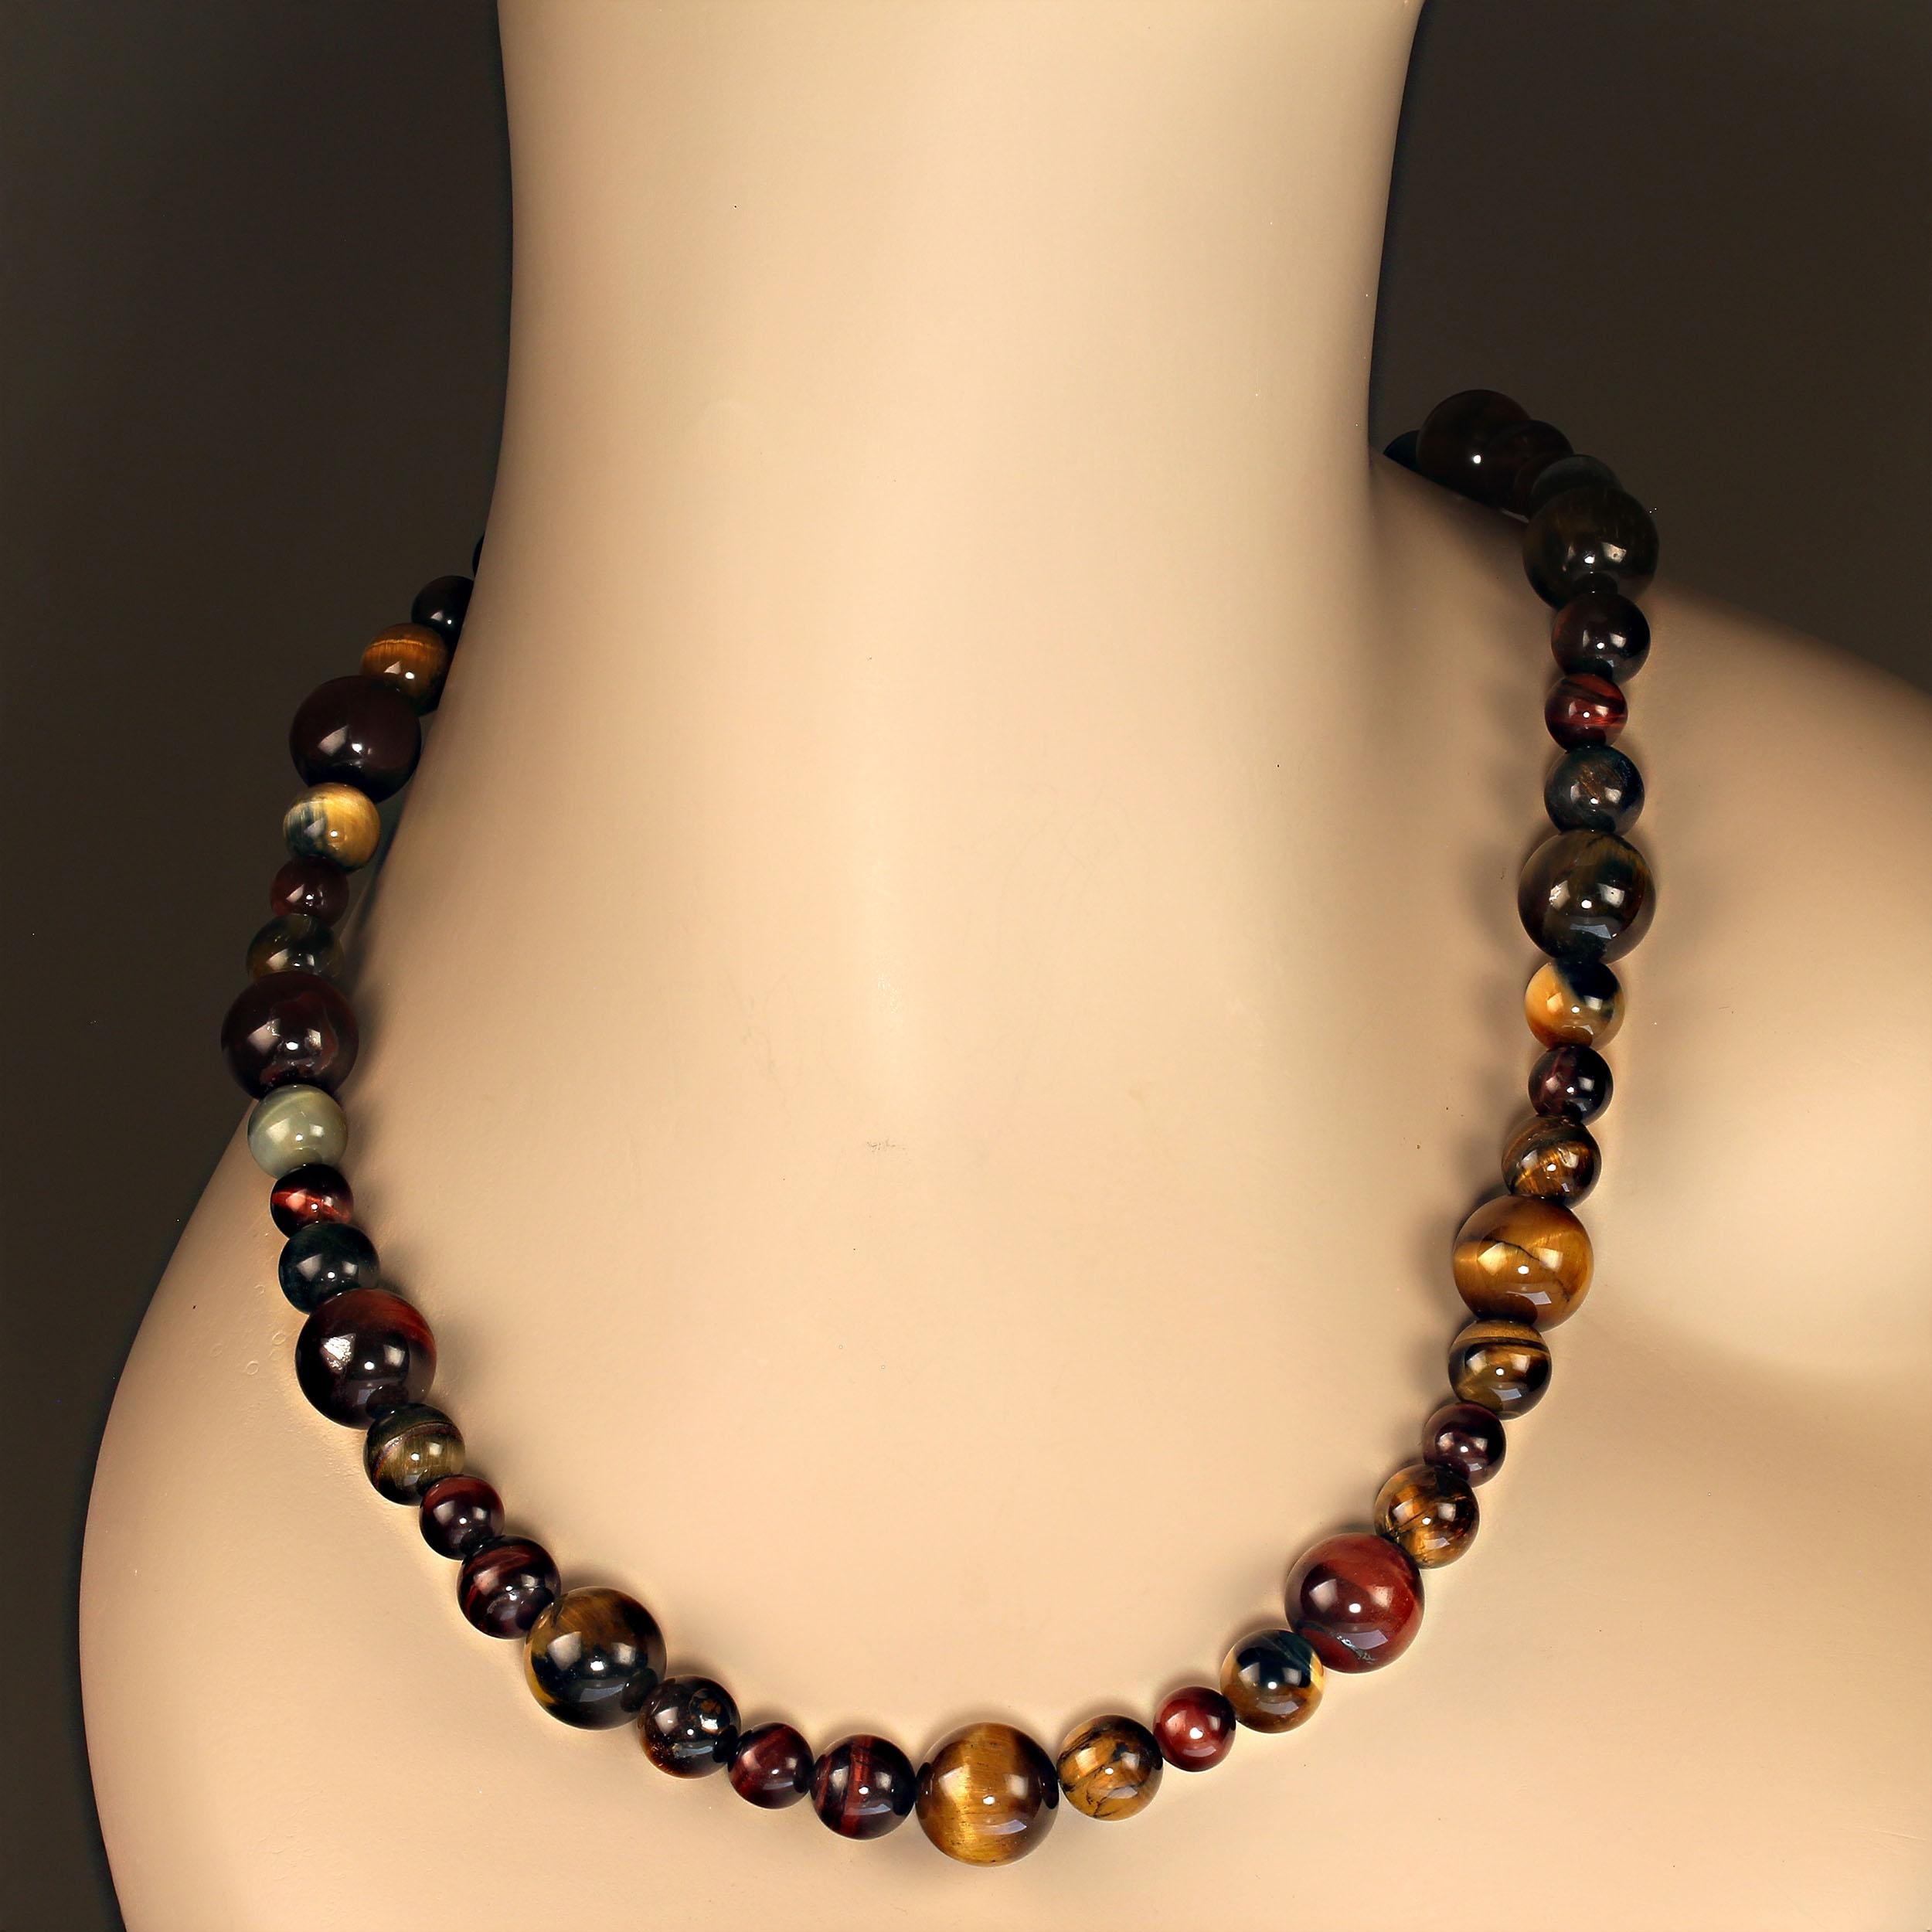 Artisan AJD 22 Inch Elegant Multi color Tiger's Eye Necklace   Perfect Gift For Sale